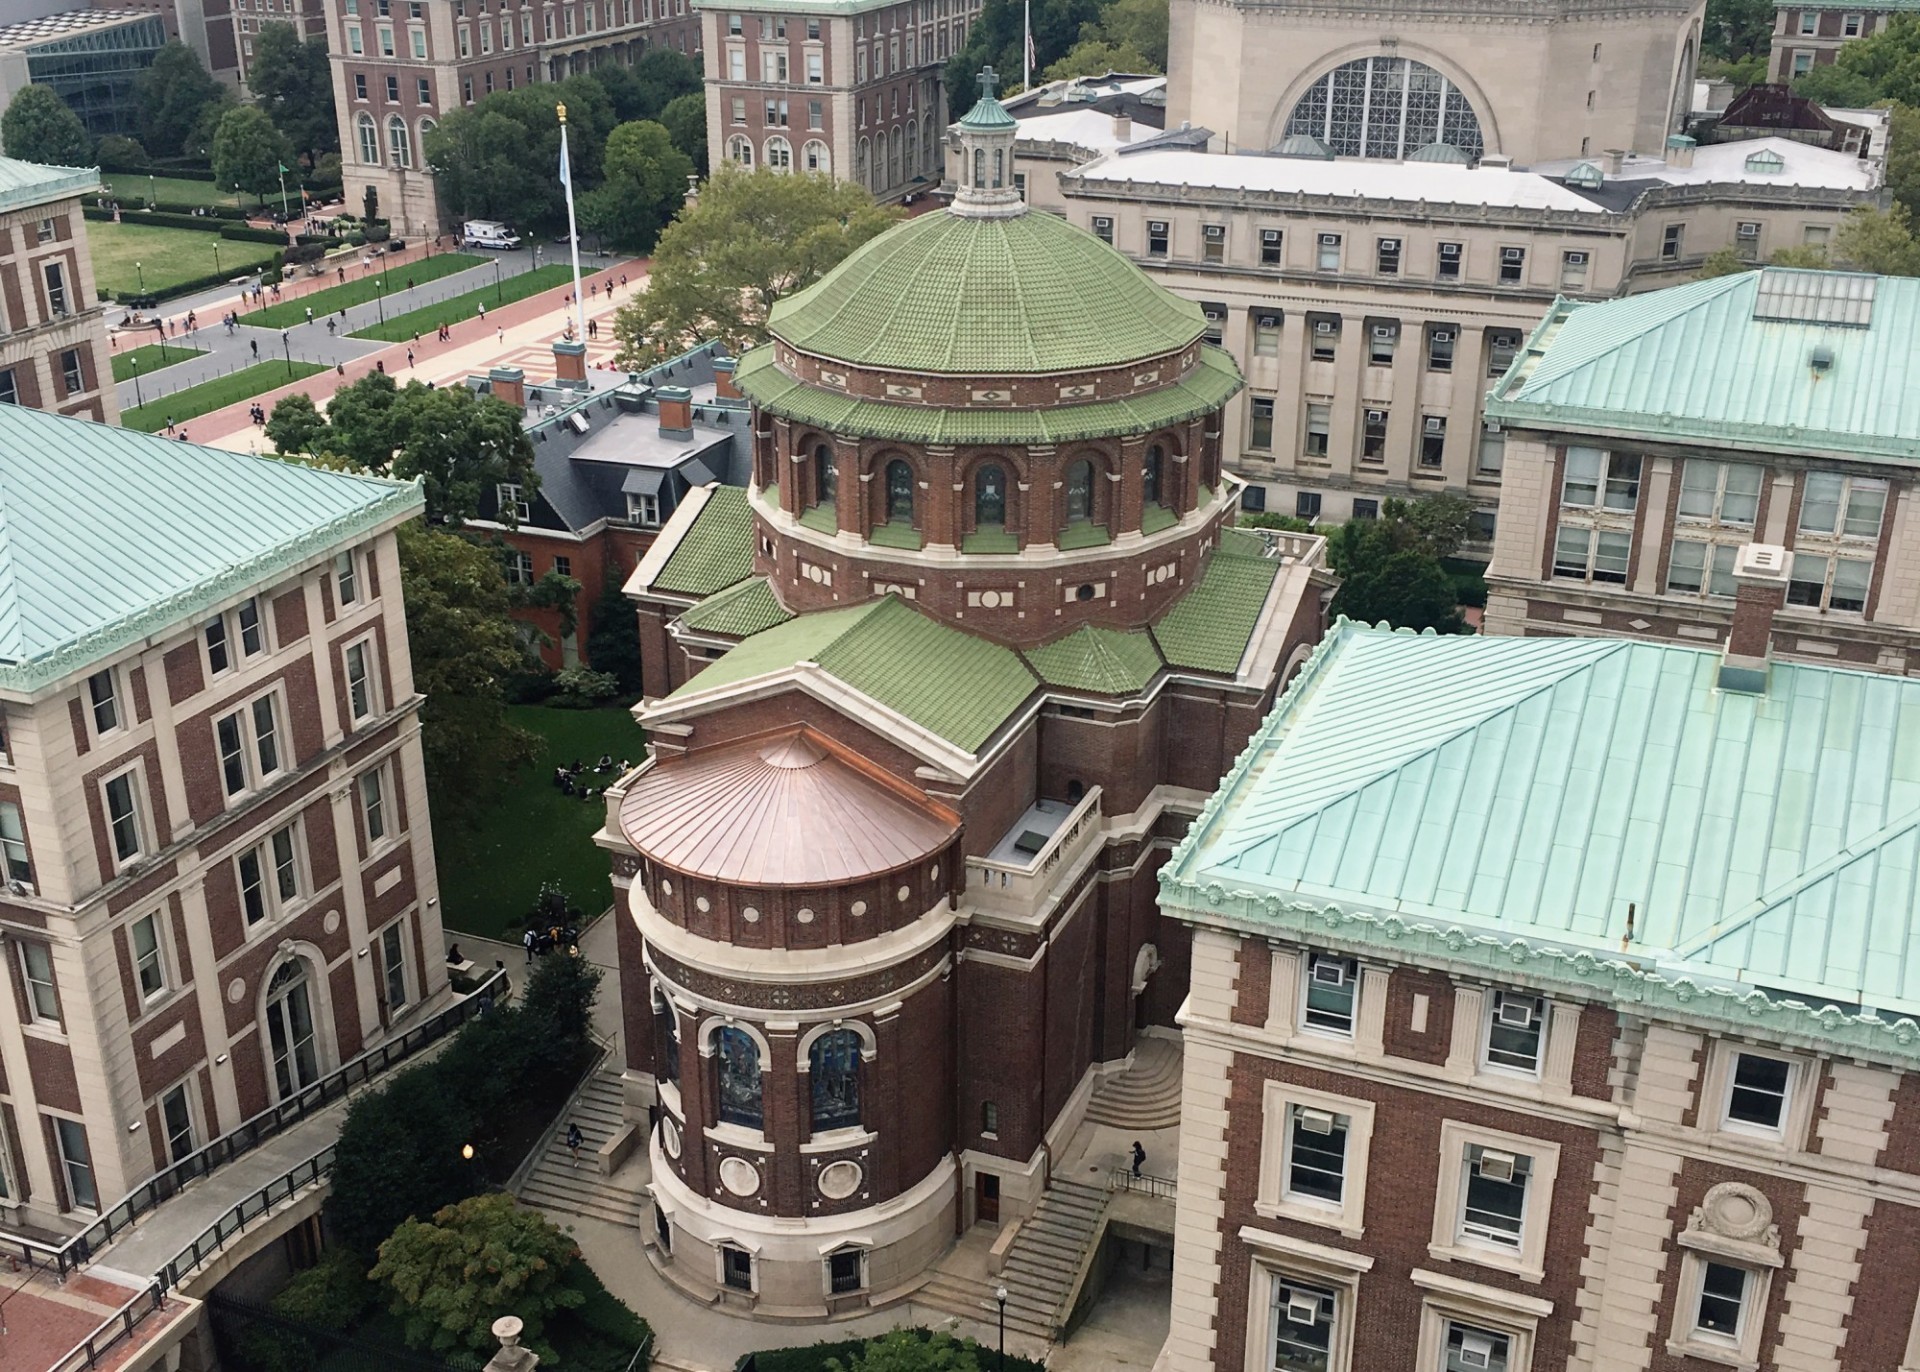 Aerial view of St. Paul's Chapel, a brick builder with a green terra cotta roof.